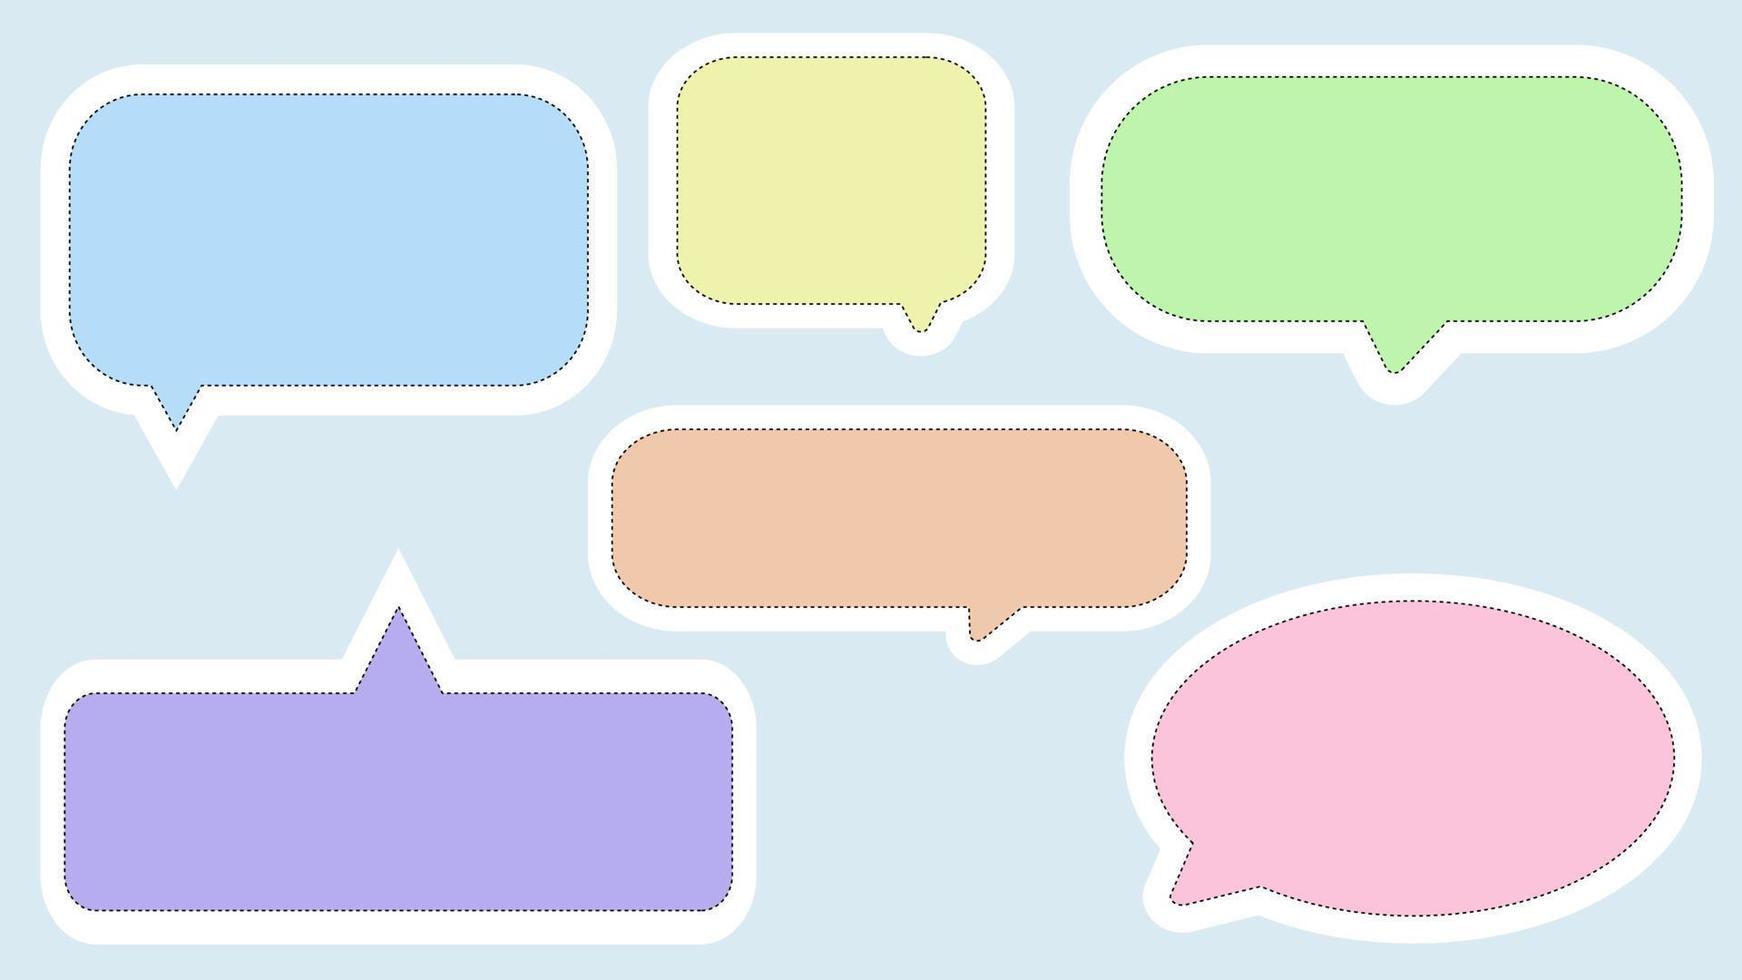 set of cute pastel speech bubble, conversation box, chat box, message box and thinking balloon illustration on white background perfect for your design vector